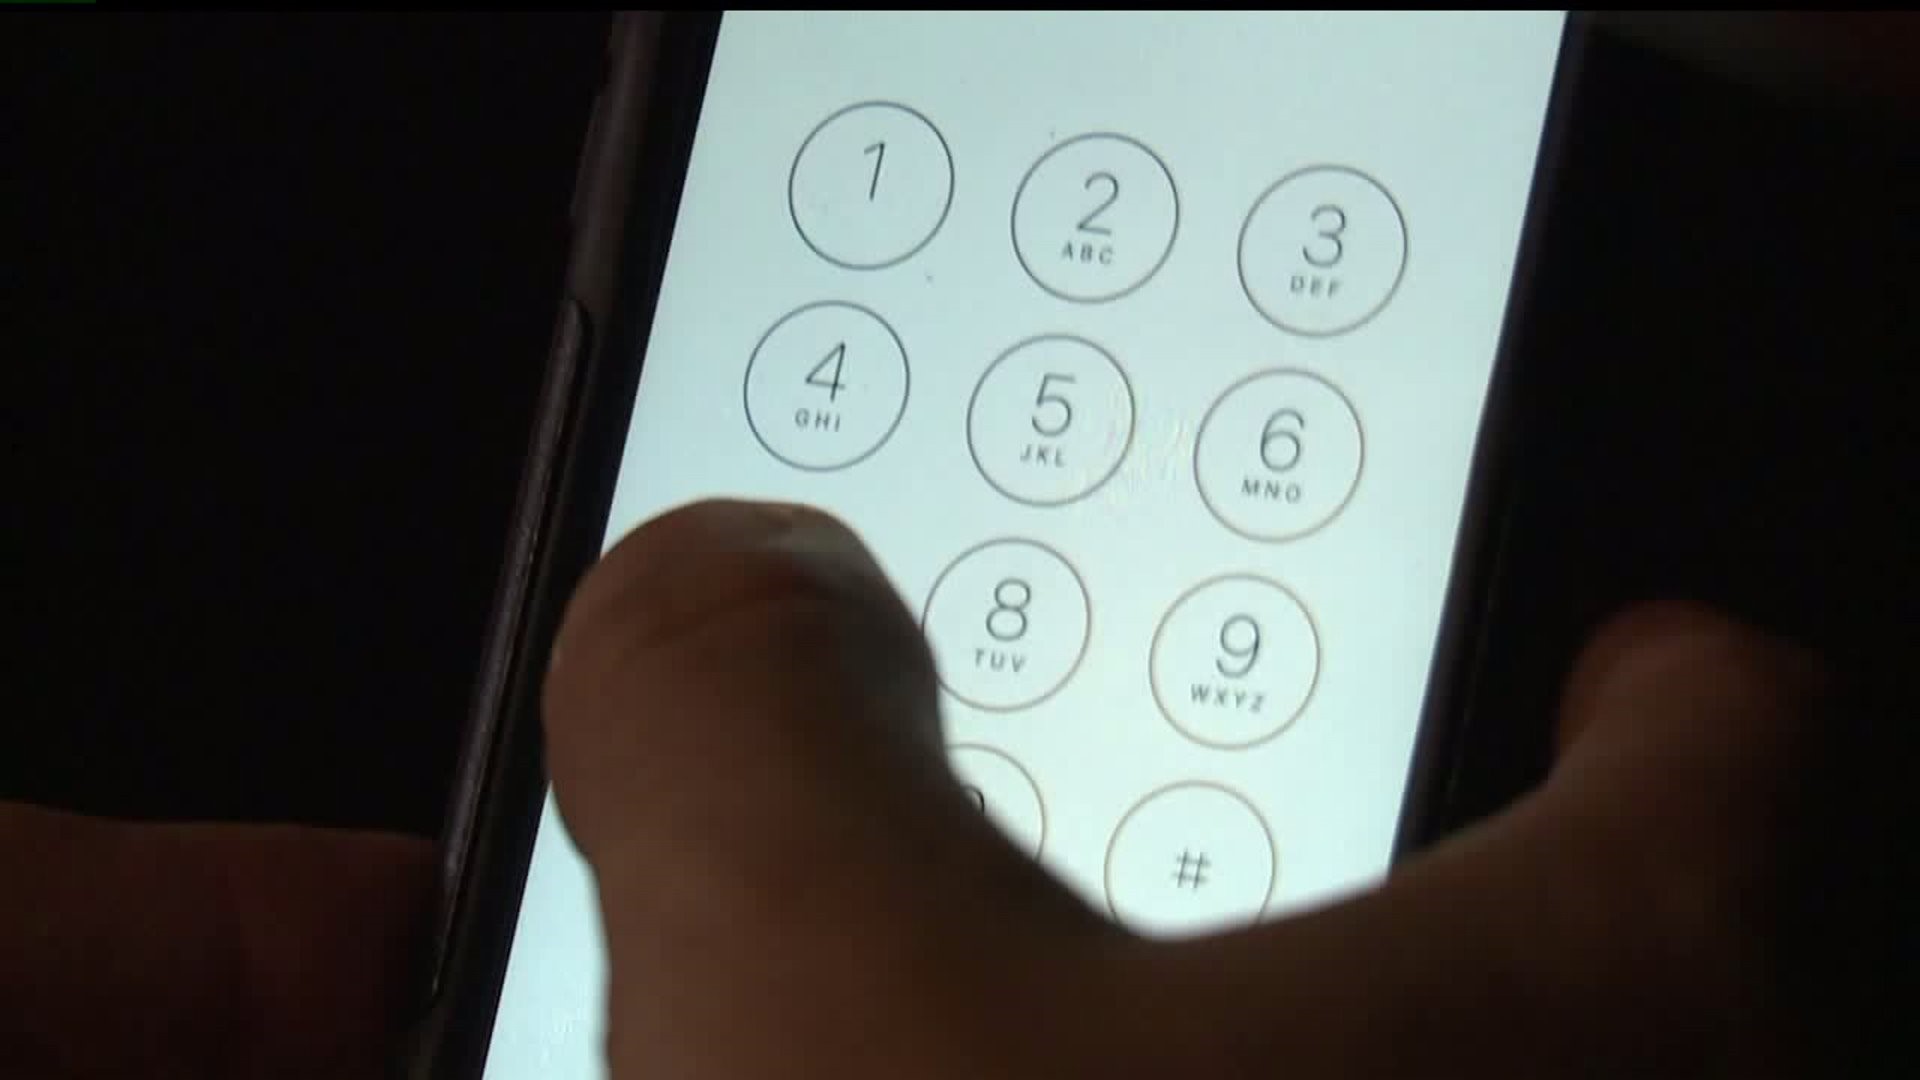 Starting next month, central PA residents and businesses will need to dial 717 to connect to local phone numbers